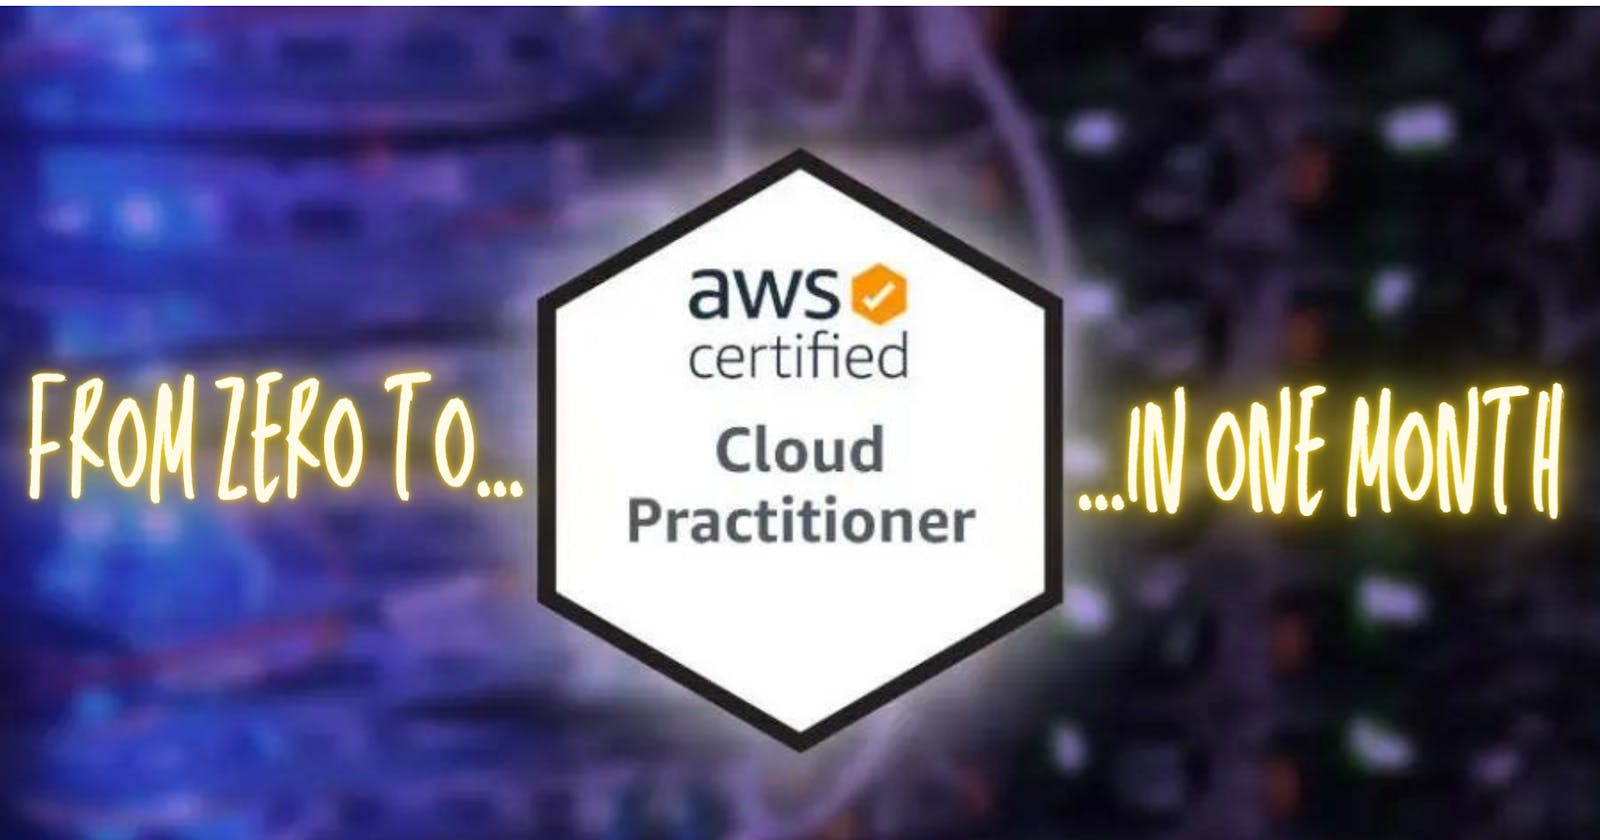 My journey from zero to AWS Cloud Practitioner Certified (in one month)